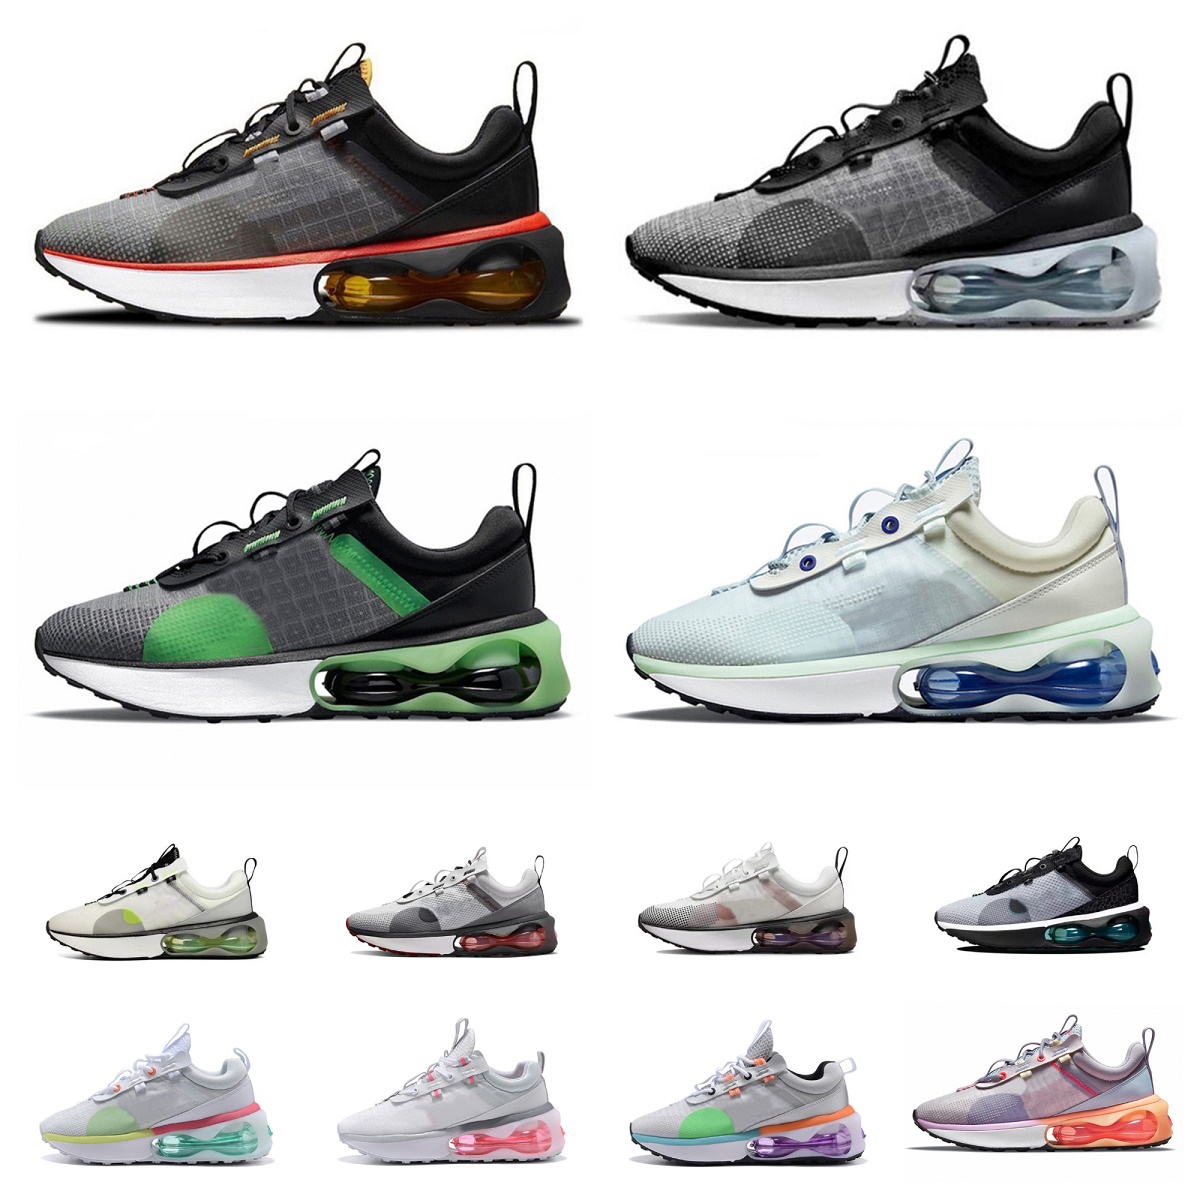 

Knit Mesh Max 2021 GS Running shoes men women airmaxs Obsidian Black Gold White Barely Rose Green Venice Navy Crimson Triple Black Court Purple Mens trainers sneakers, Bubble package bag